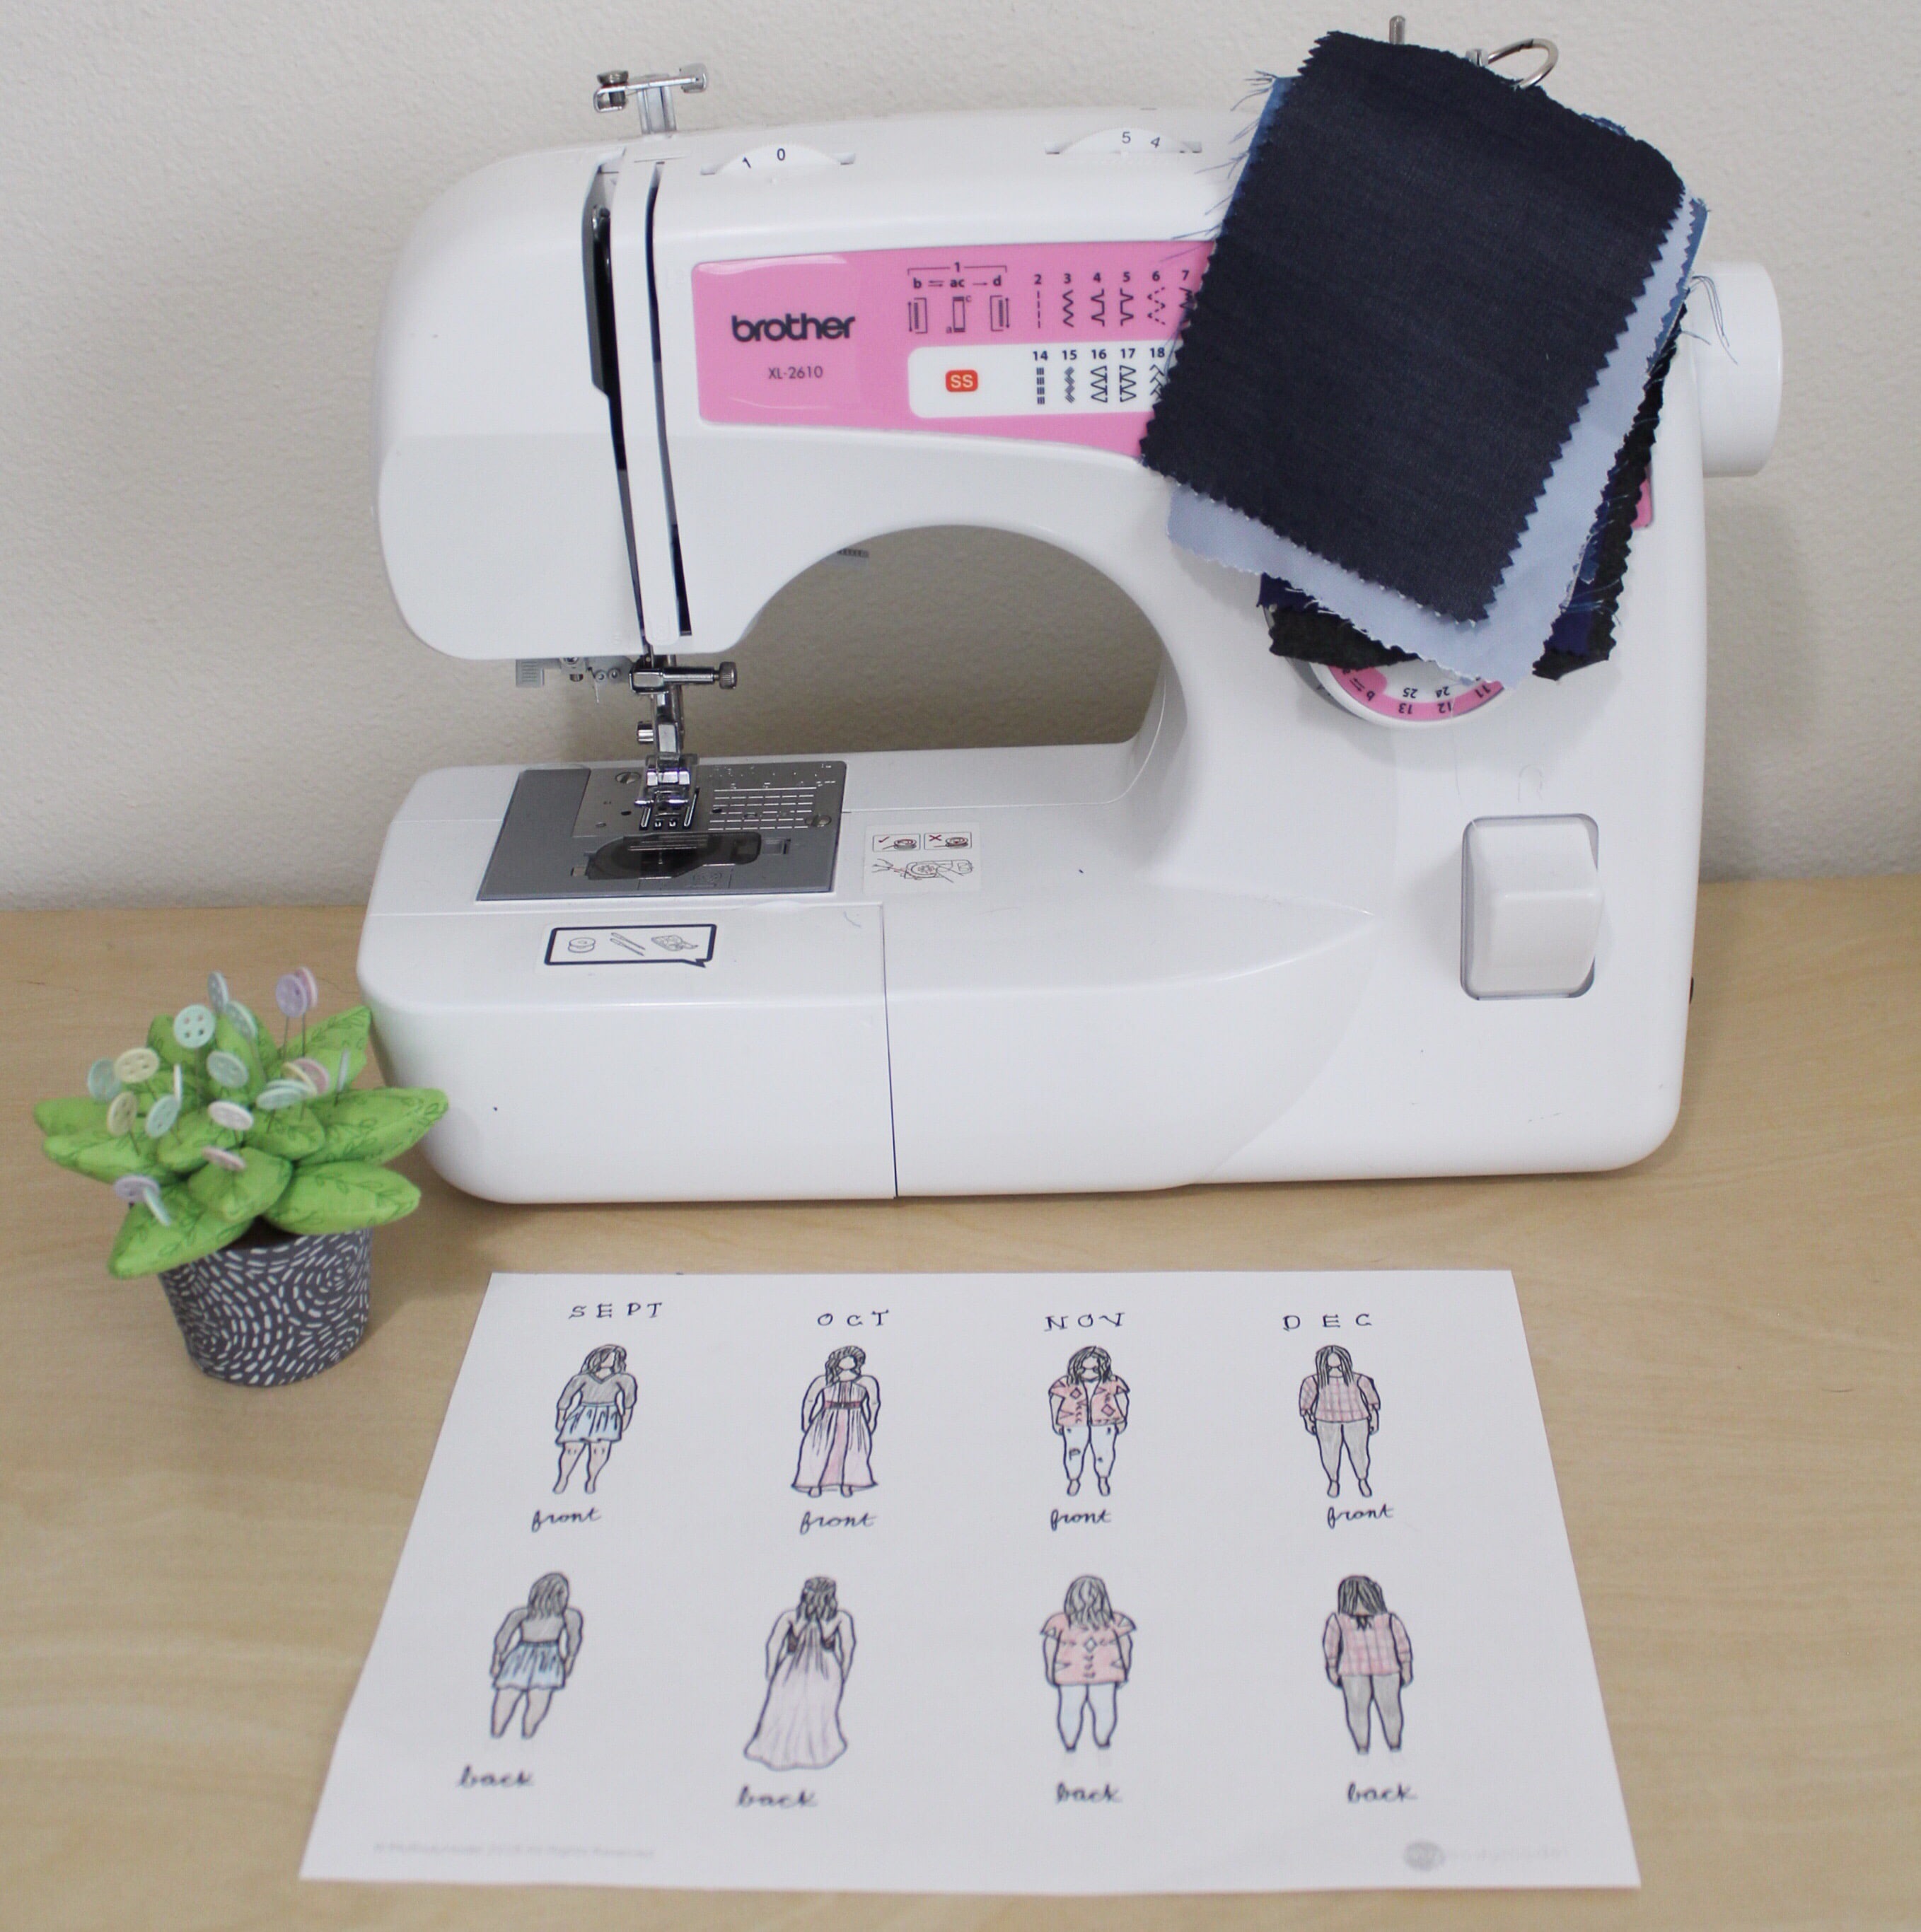 MyBodyModel Sewing Sketches with Sewing Machine and Fabric Swatches